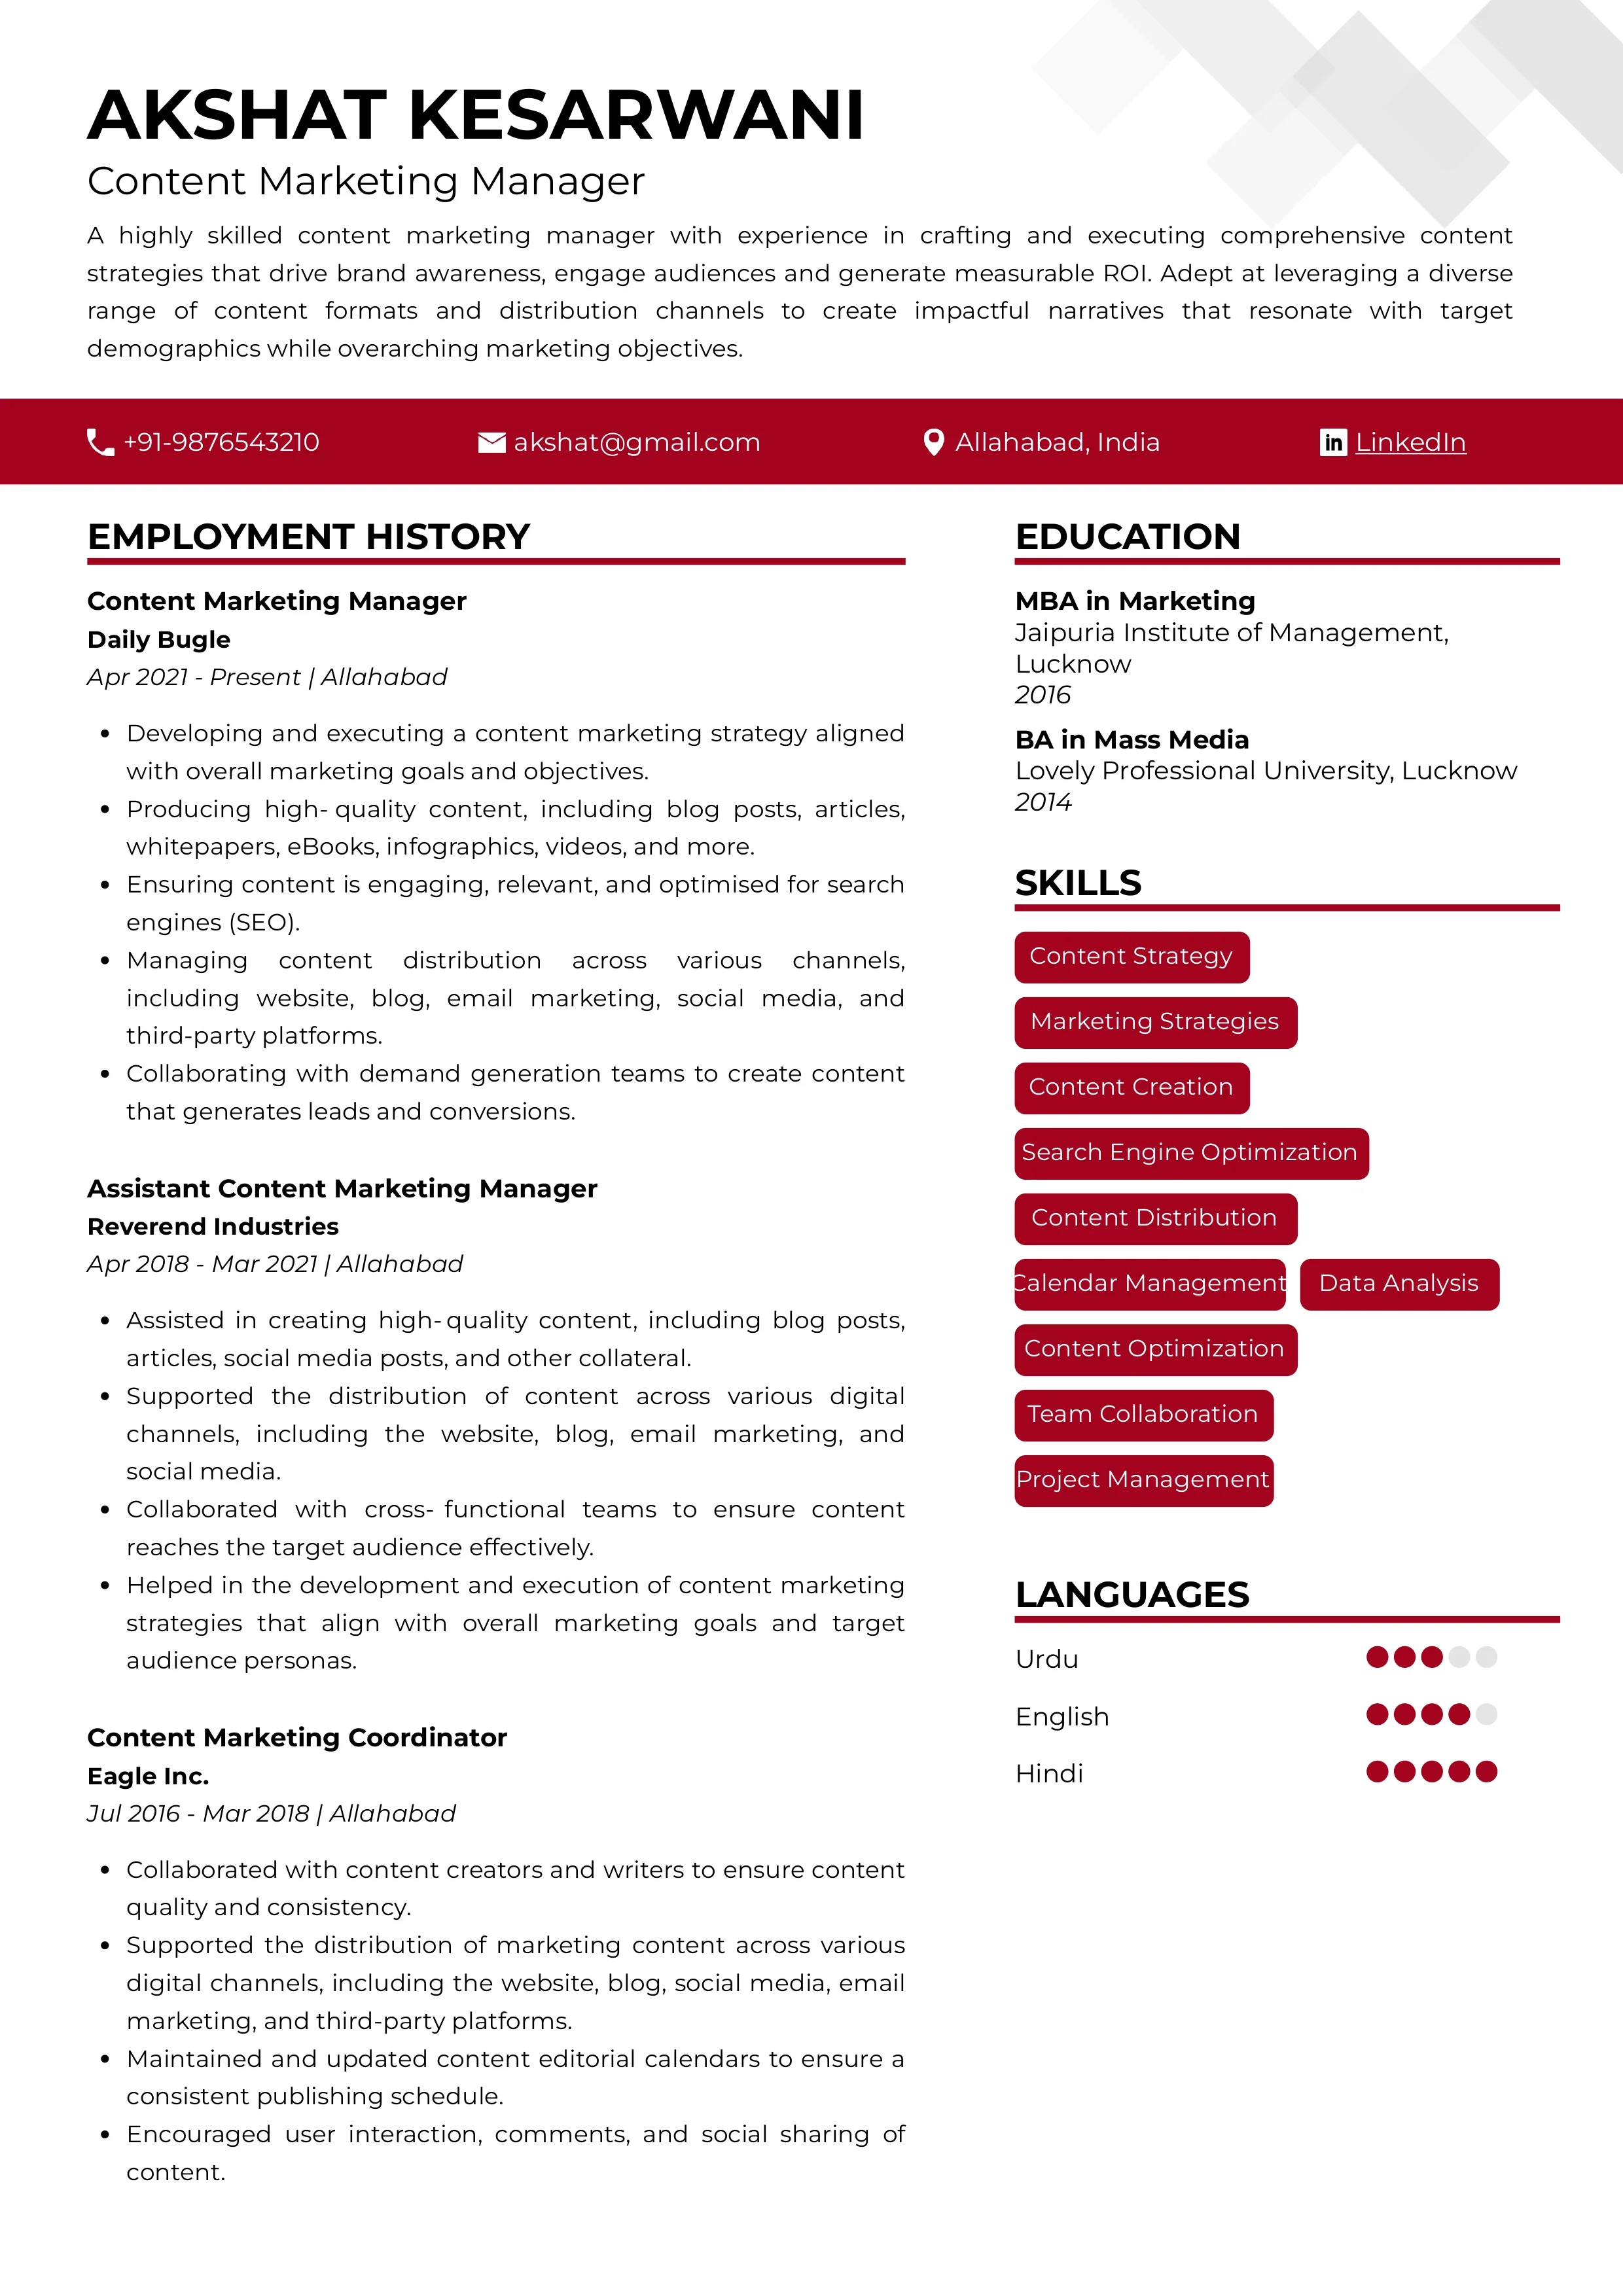 Sample Resume of Content Marketing Manager | Free Resume Templates & Samples on Resumod.co